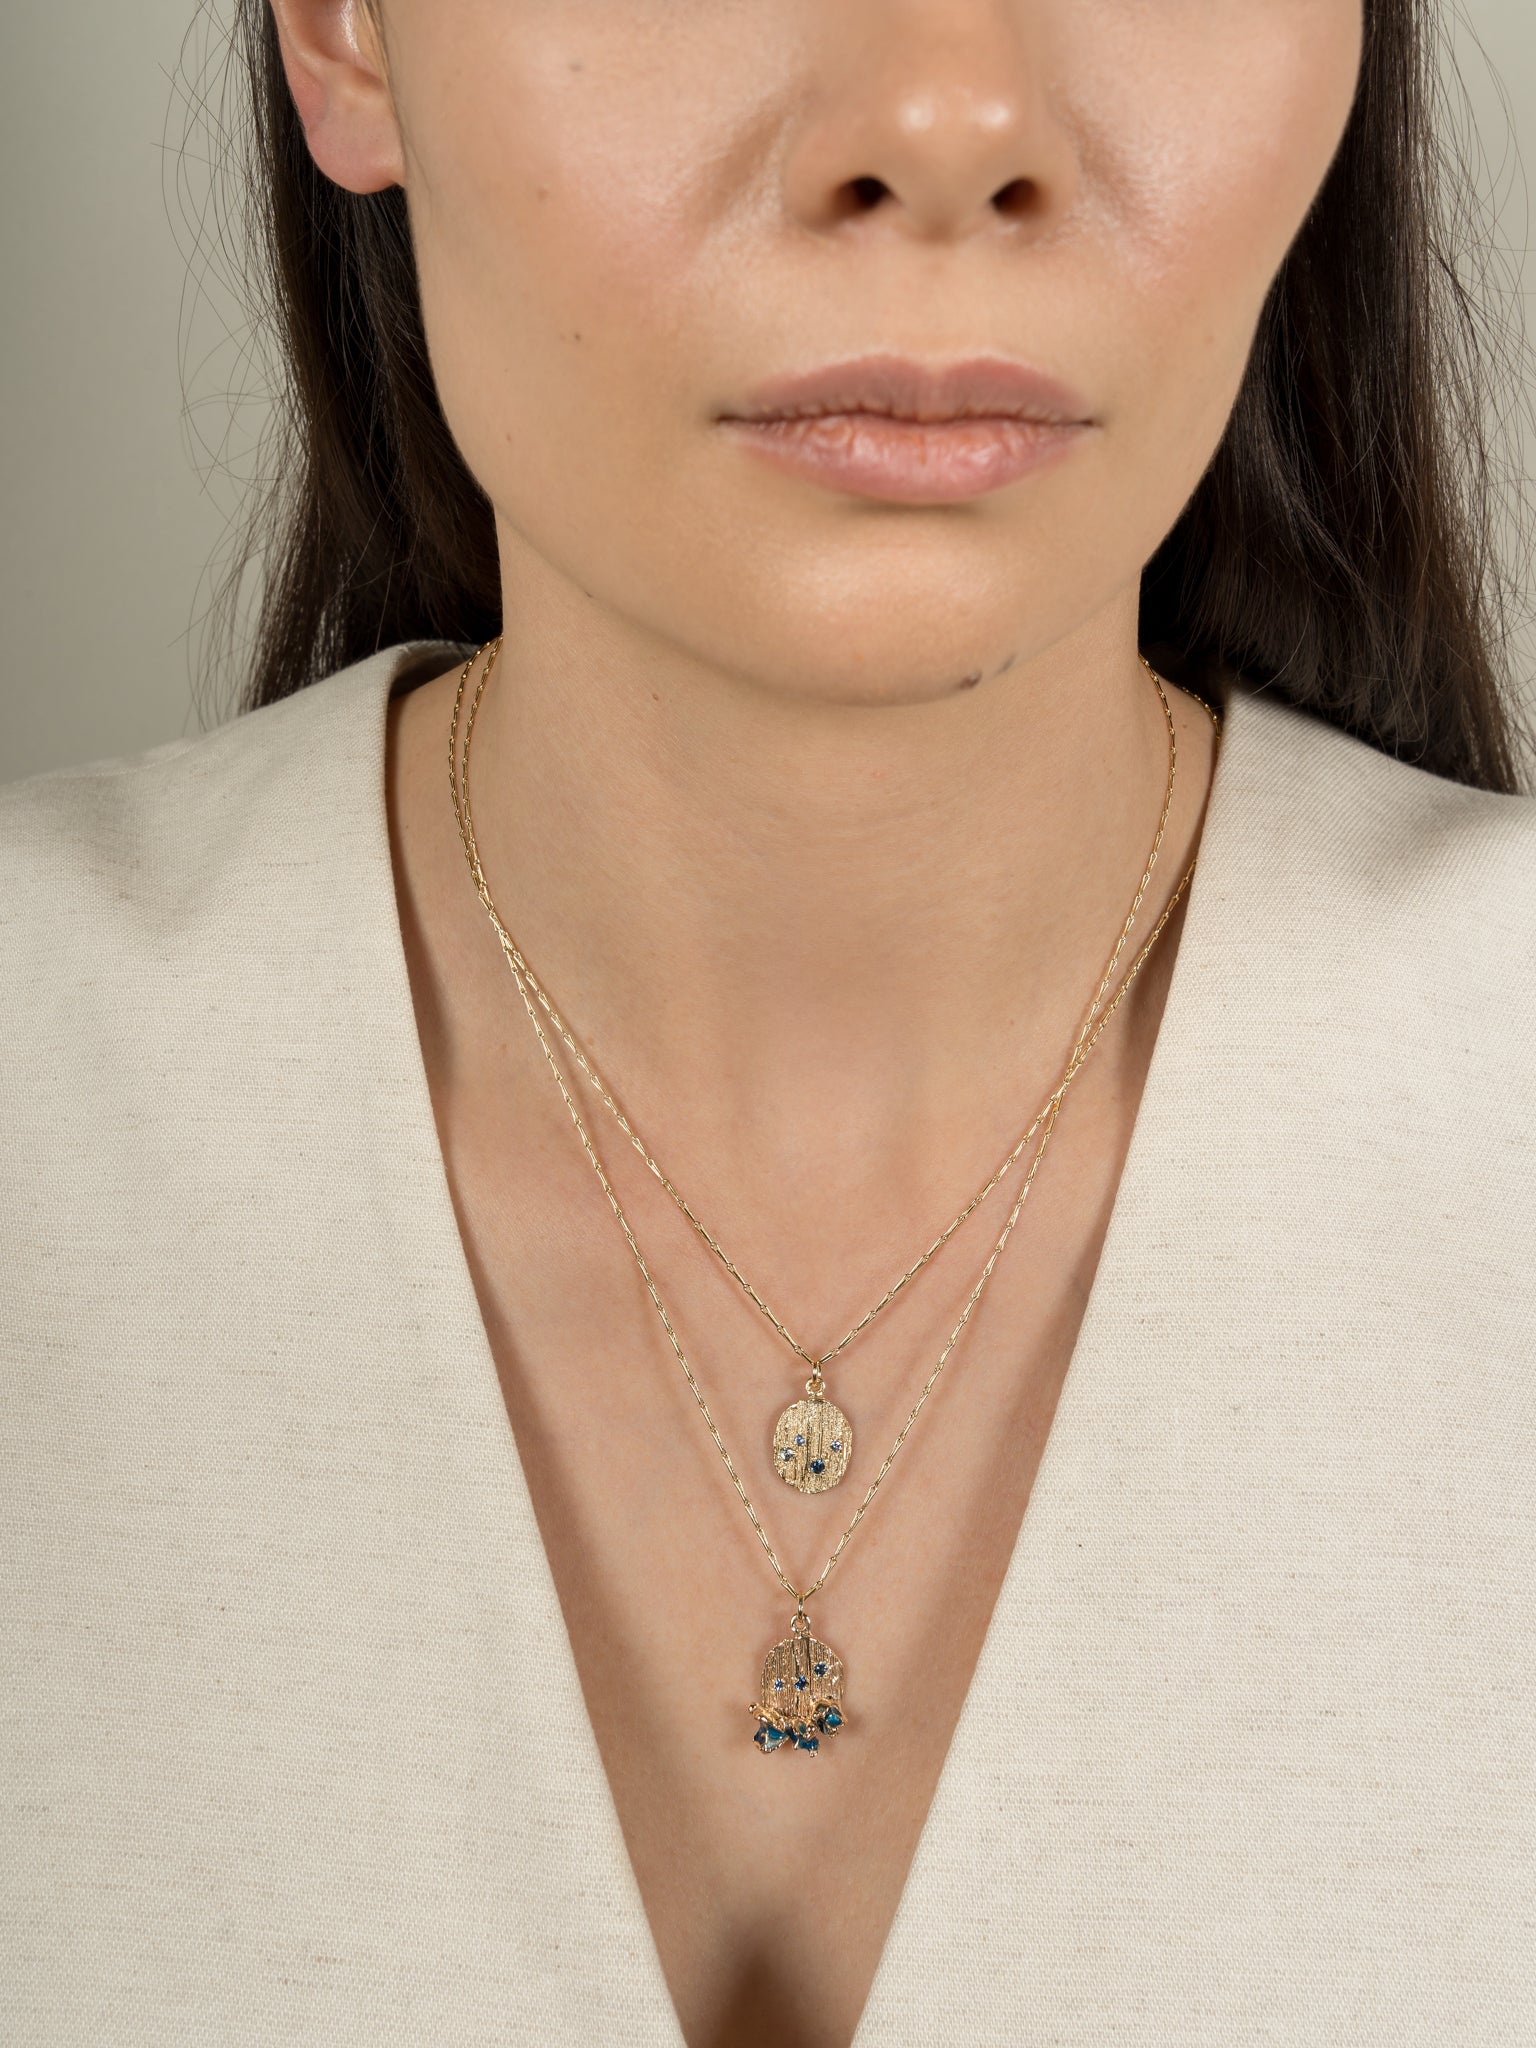 Model wearing handmade layered gold necklaces with sapphires and enamel. 